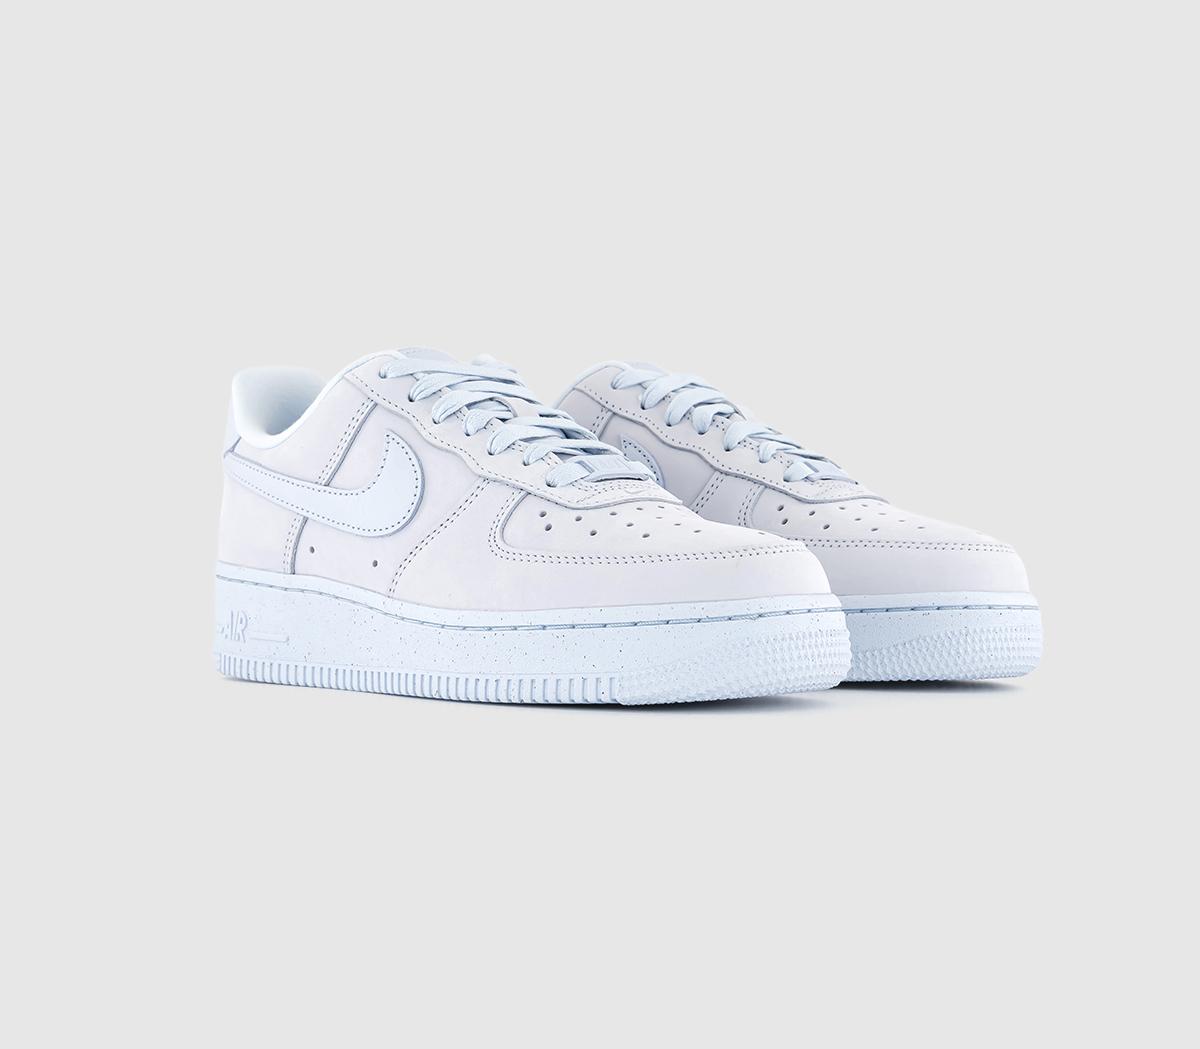 Nike Air Force 1 ’07 Prm Trainers Blue Tint, 7